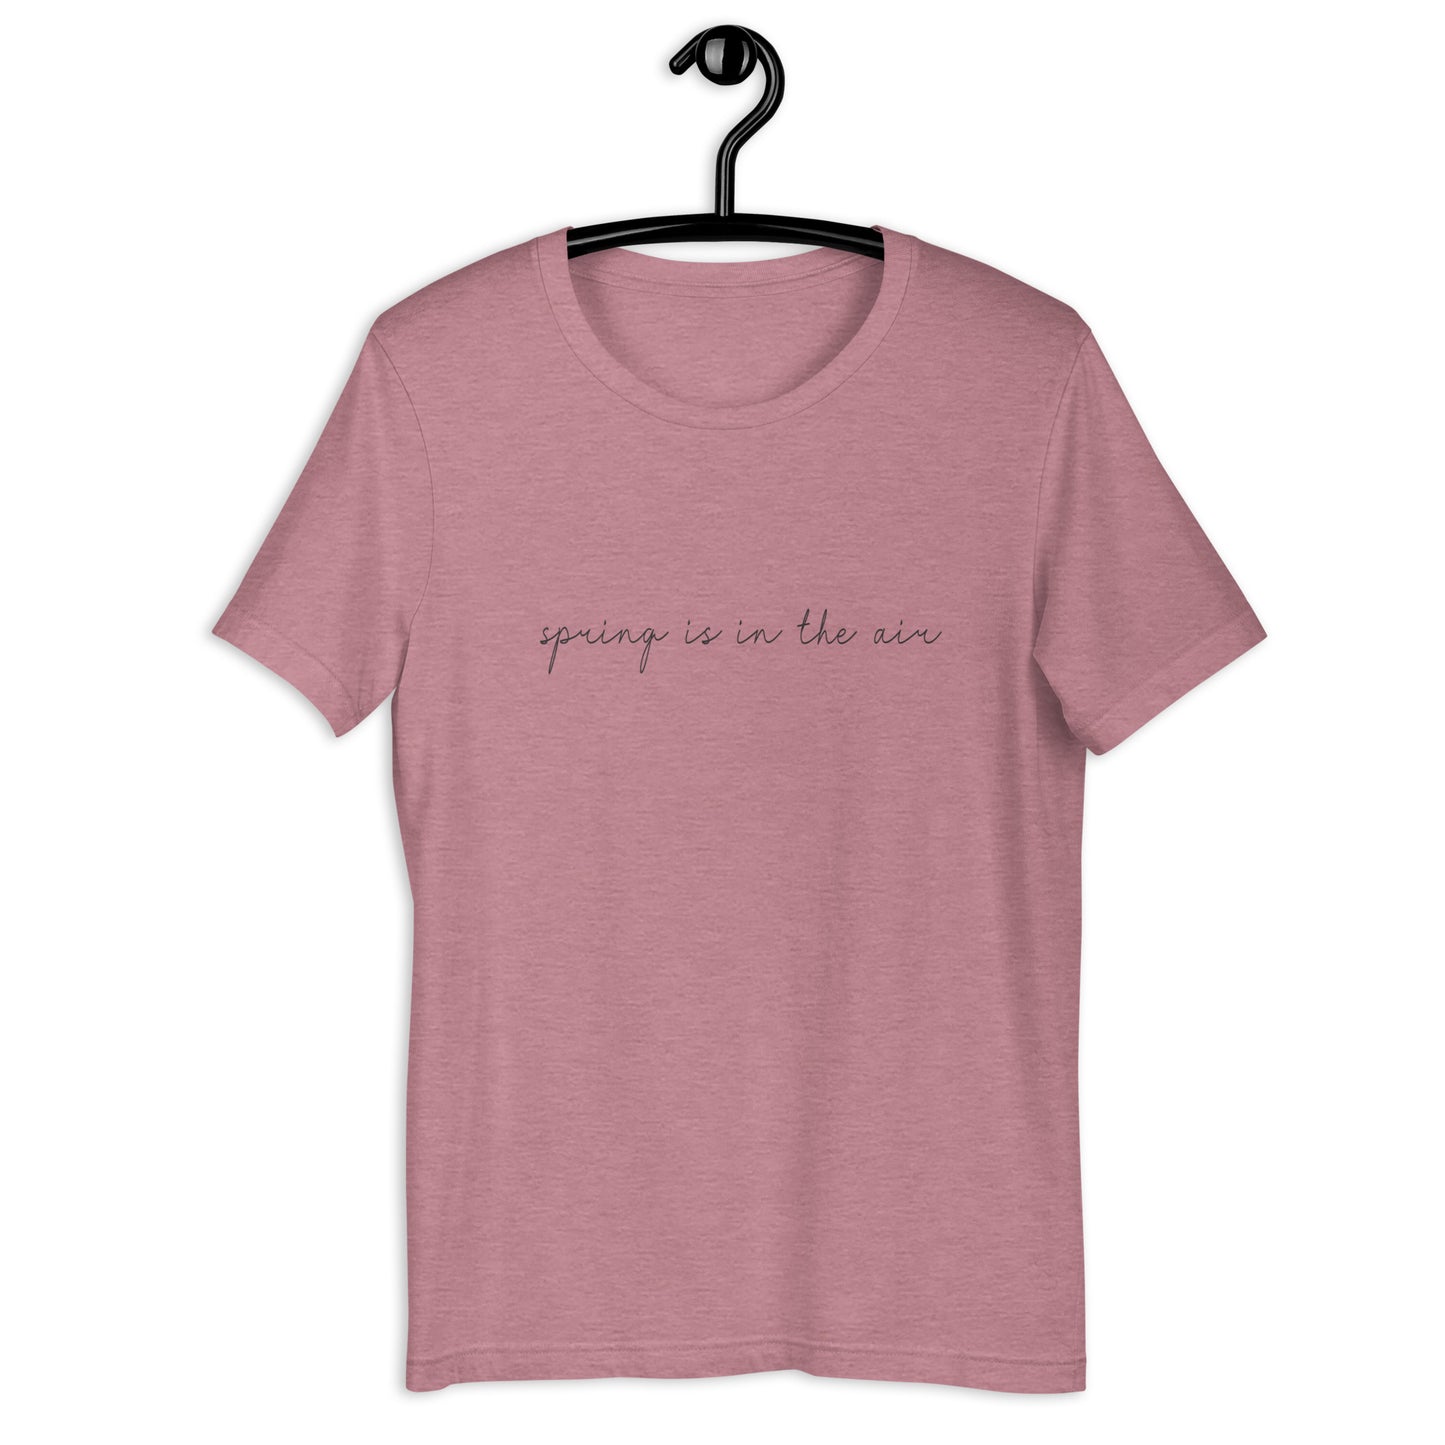 Spring Is In The Air - Unisex t-shirt